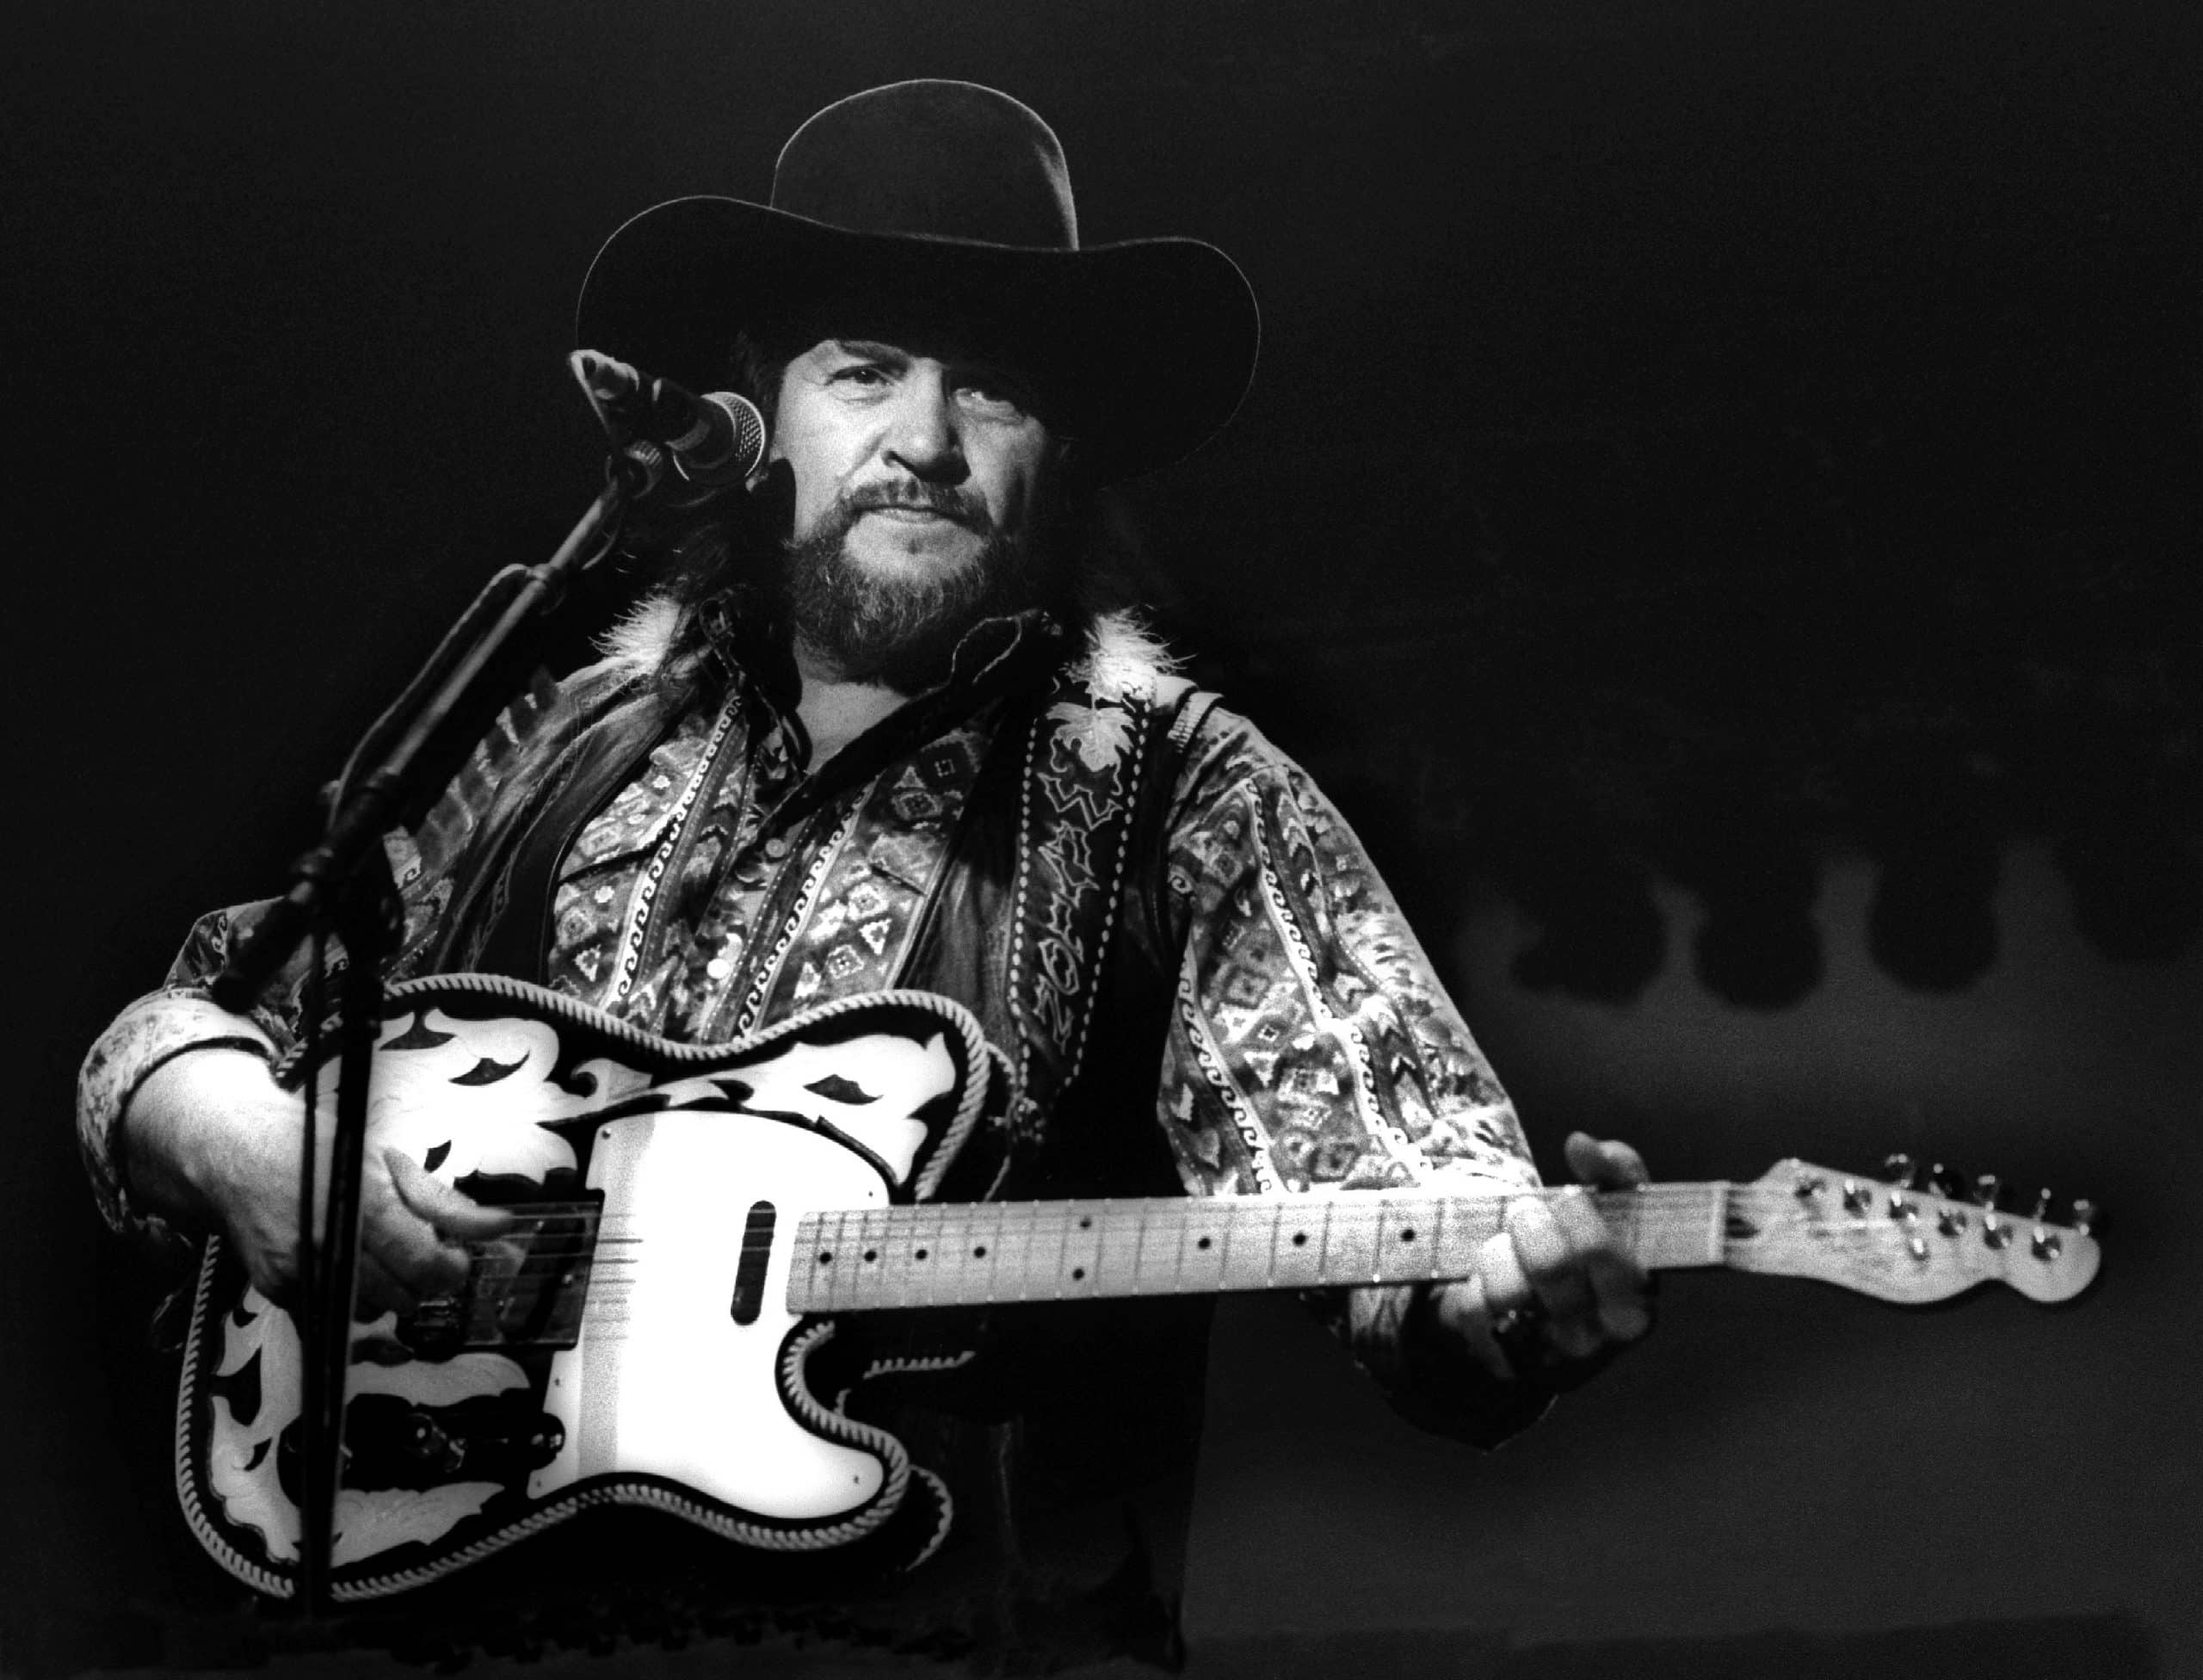 Learn six wild but true facts about country singer Waylon Jennings